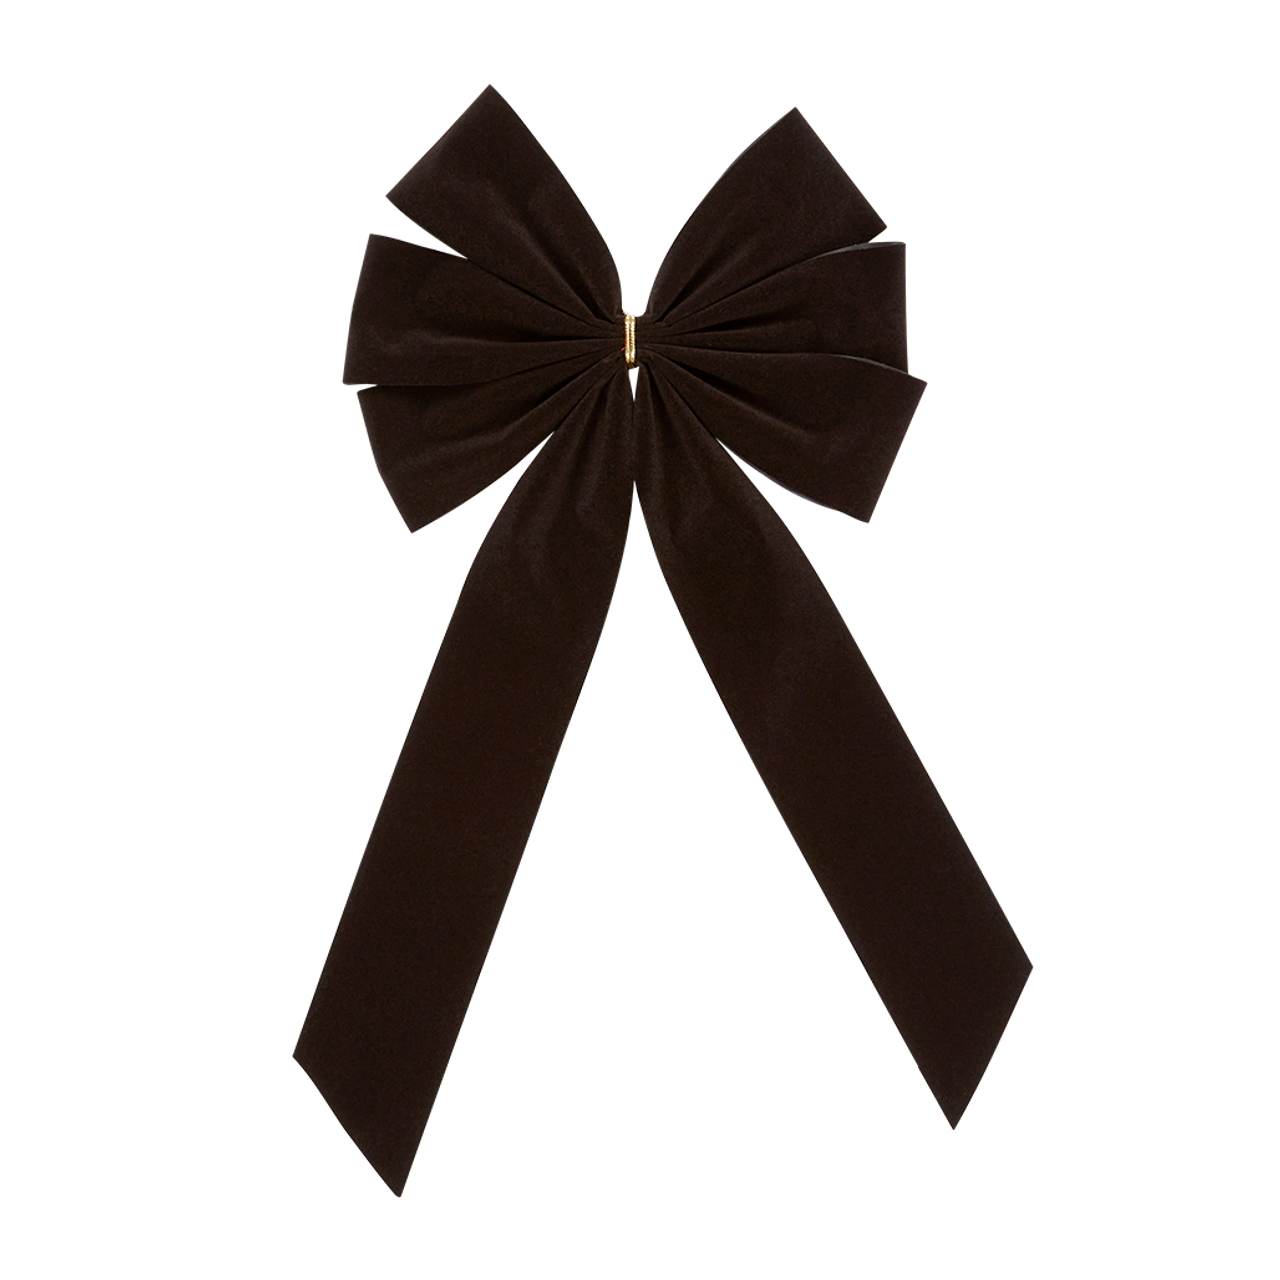 6 Loop Memorial Bow  Black Mourning Funeral Bow